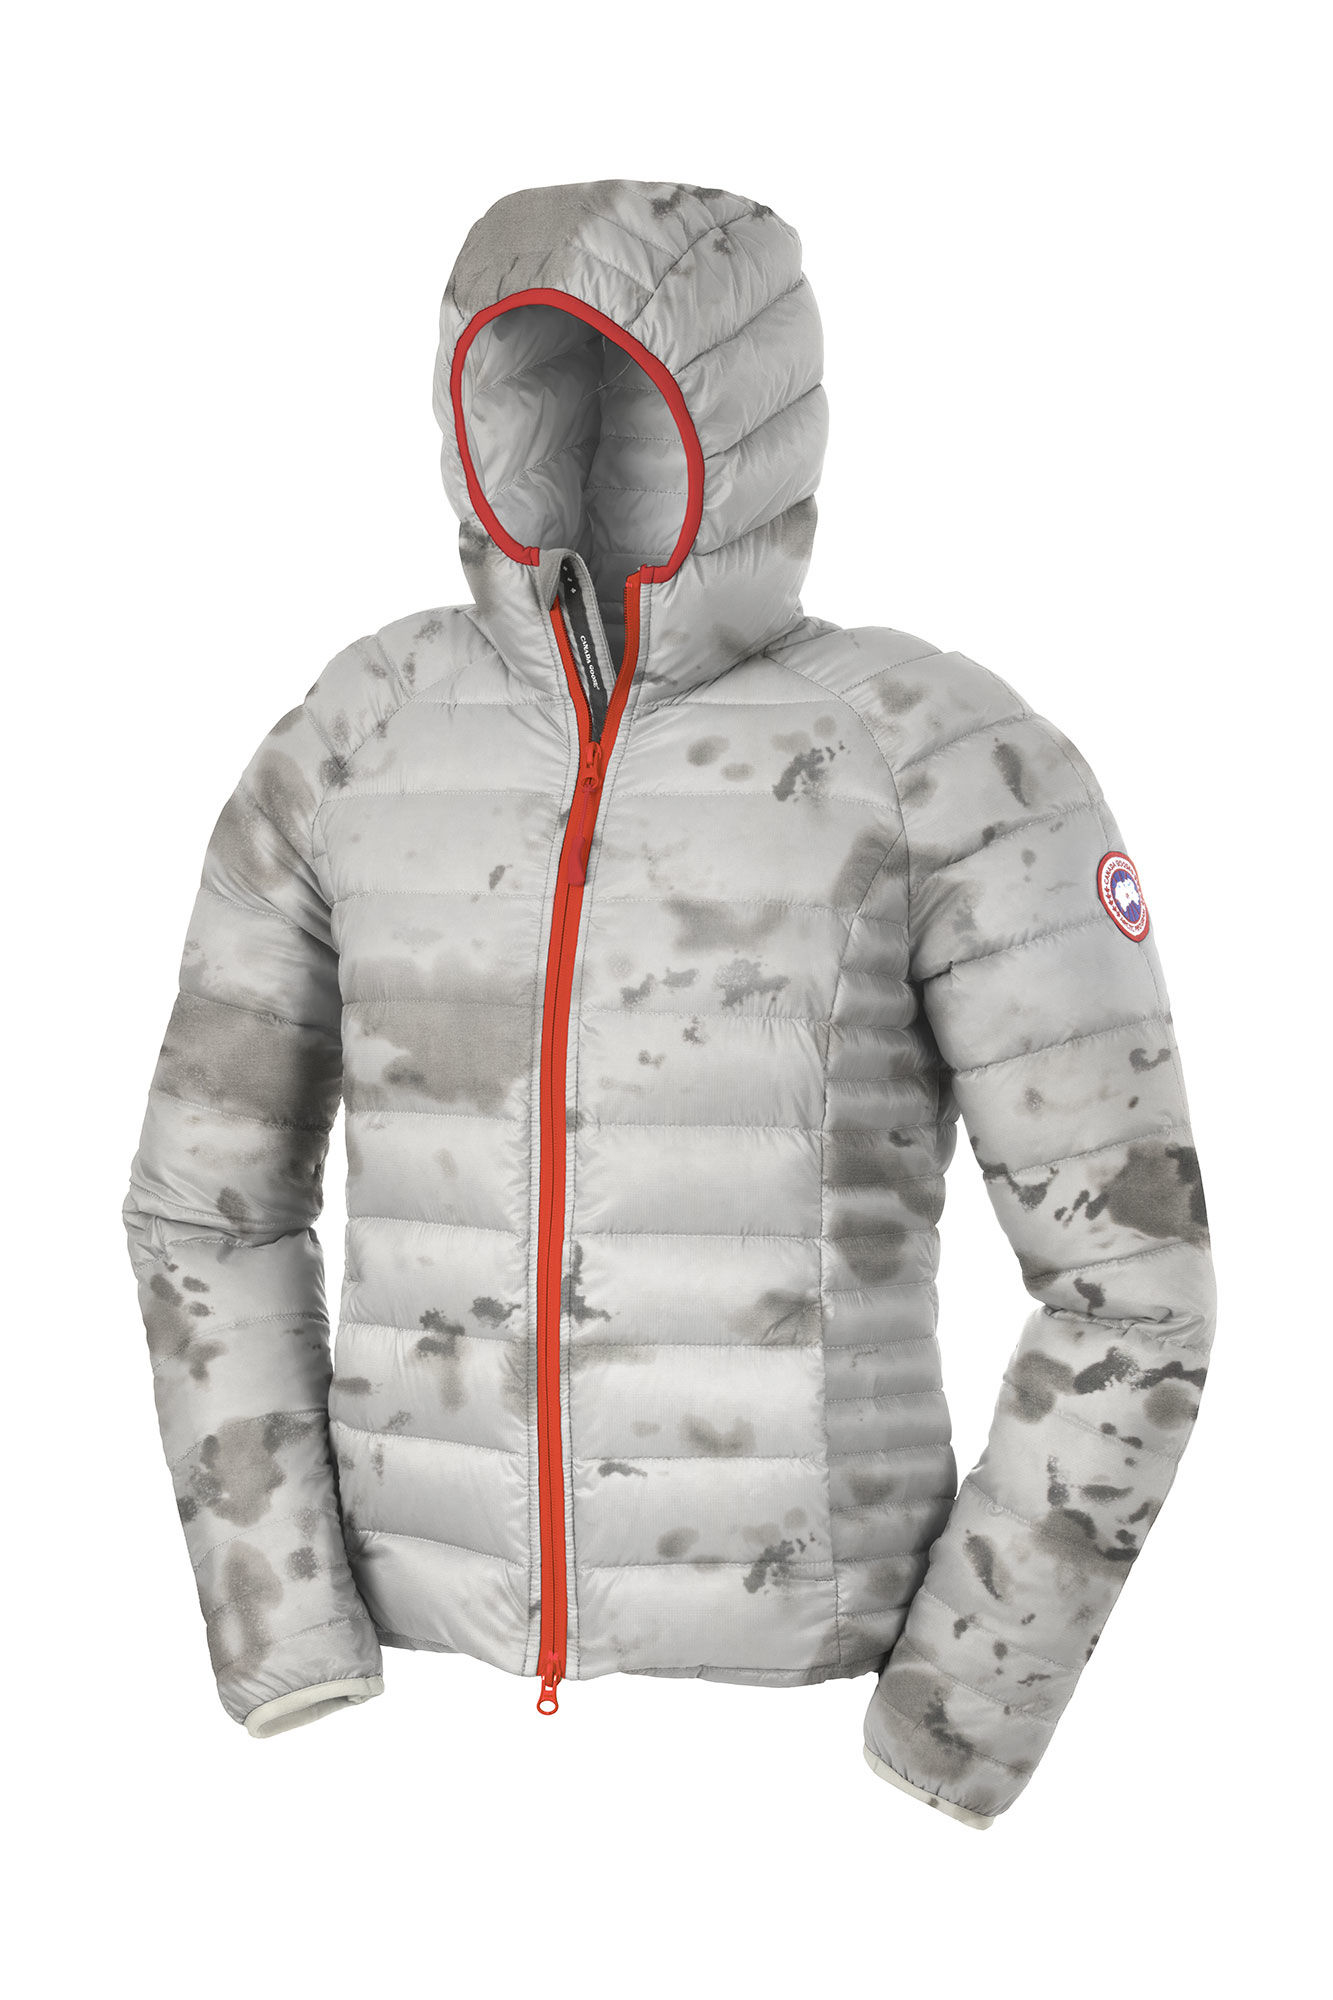 85% OFF Canada Goose - Brookvale Hooded Jacket - small - Red